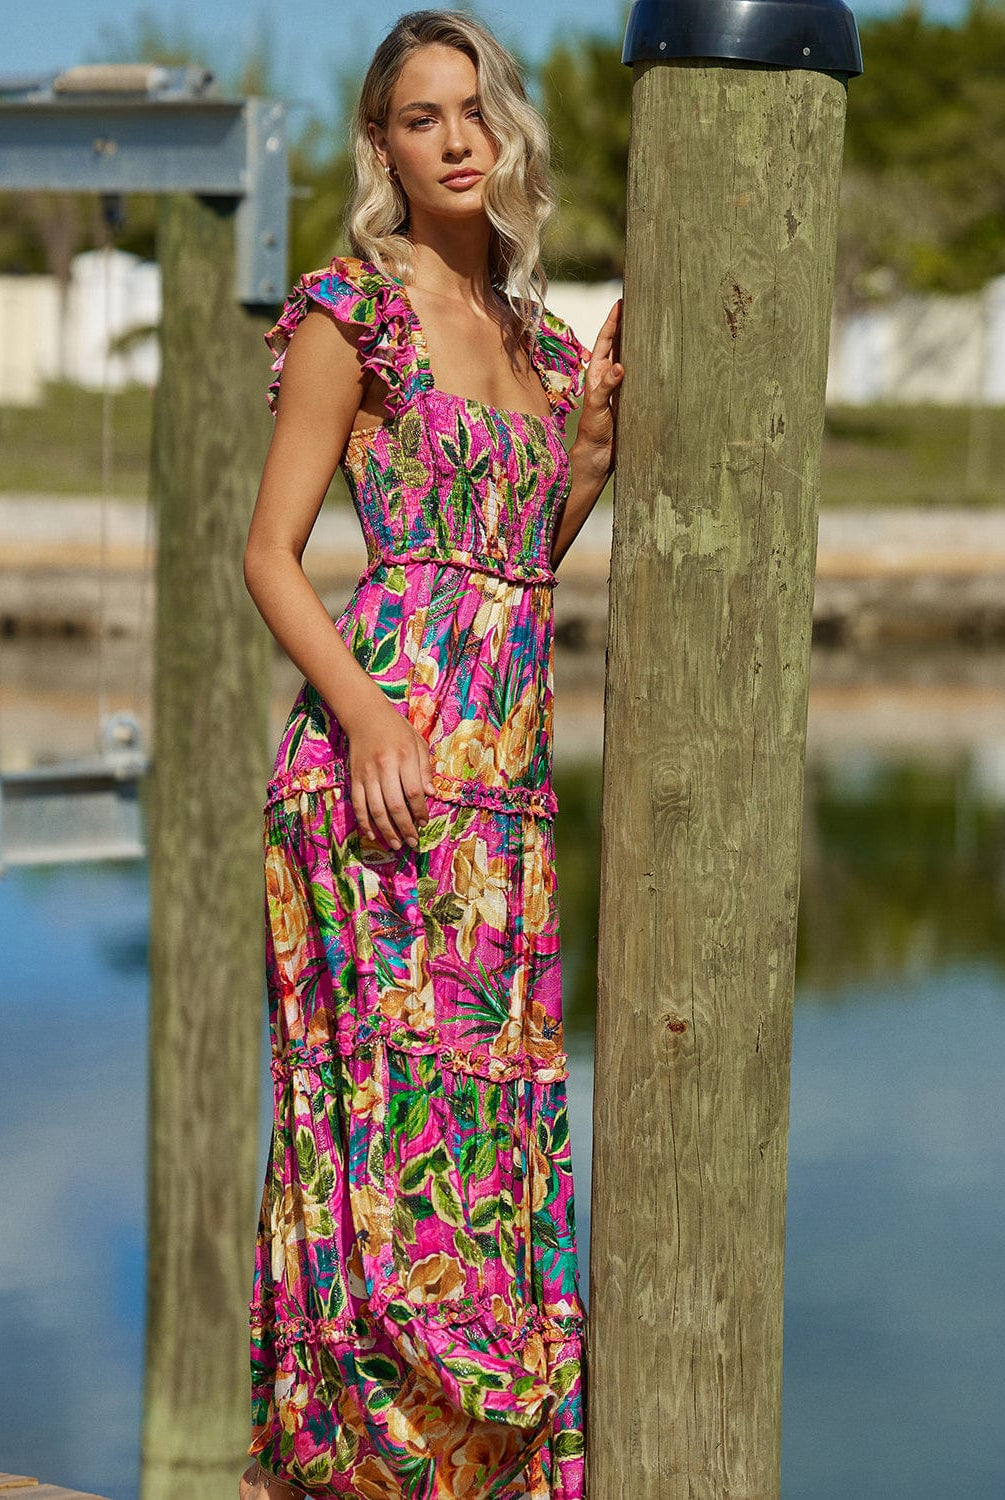 Blonde woman wearing a maxi pink tropical dress with sequins stands on a dock by water.